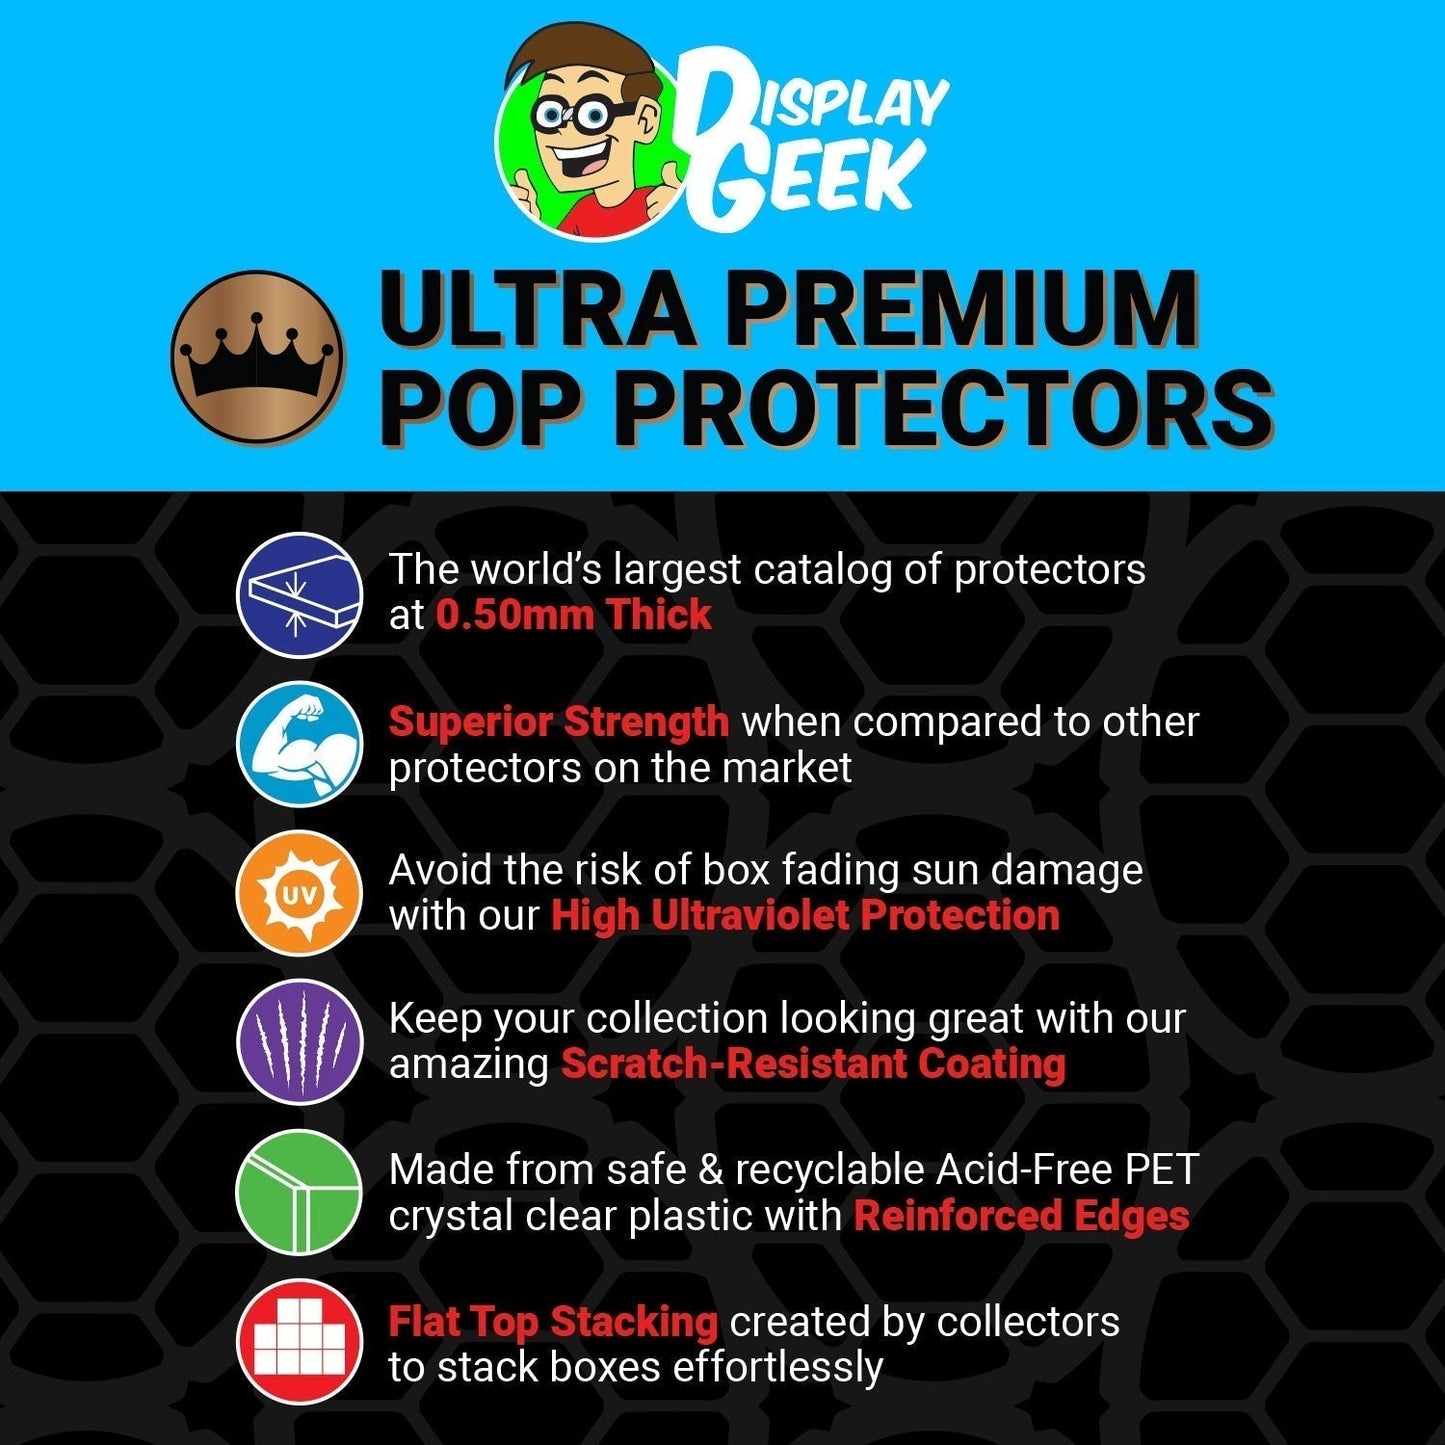 Pop Protector for Avengers Assemble Black Widow #588 Funko Pop Deluxe - PPG Pop Protector Guide Search Created by Display Geek